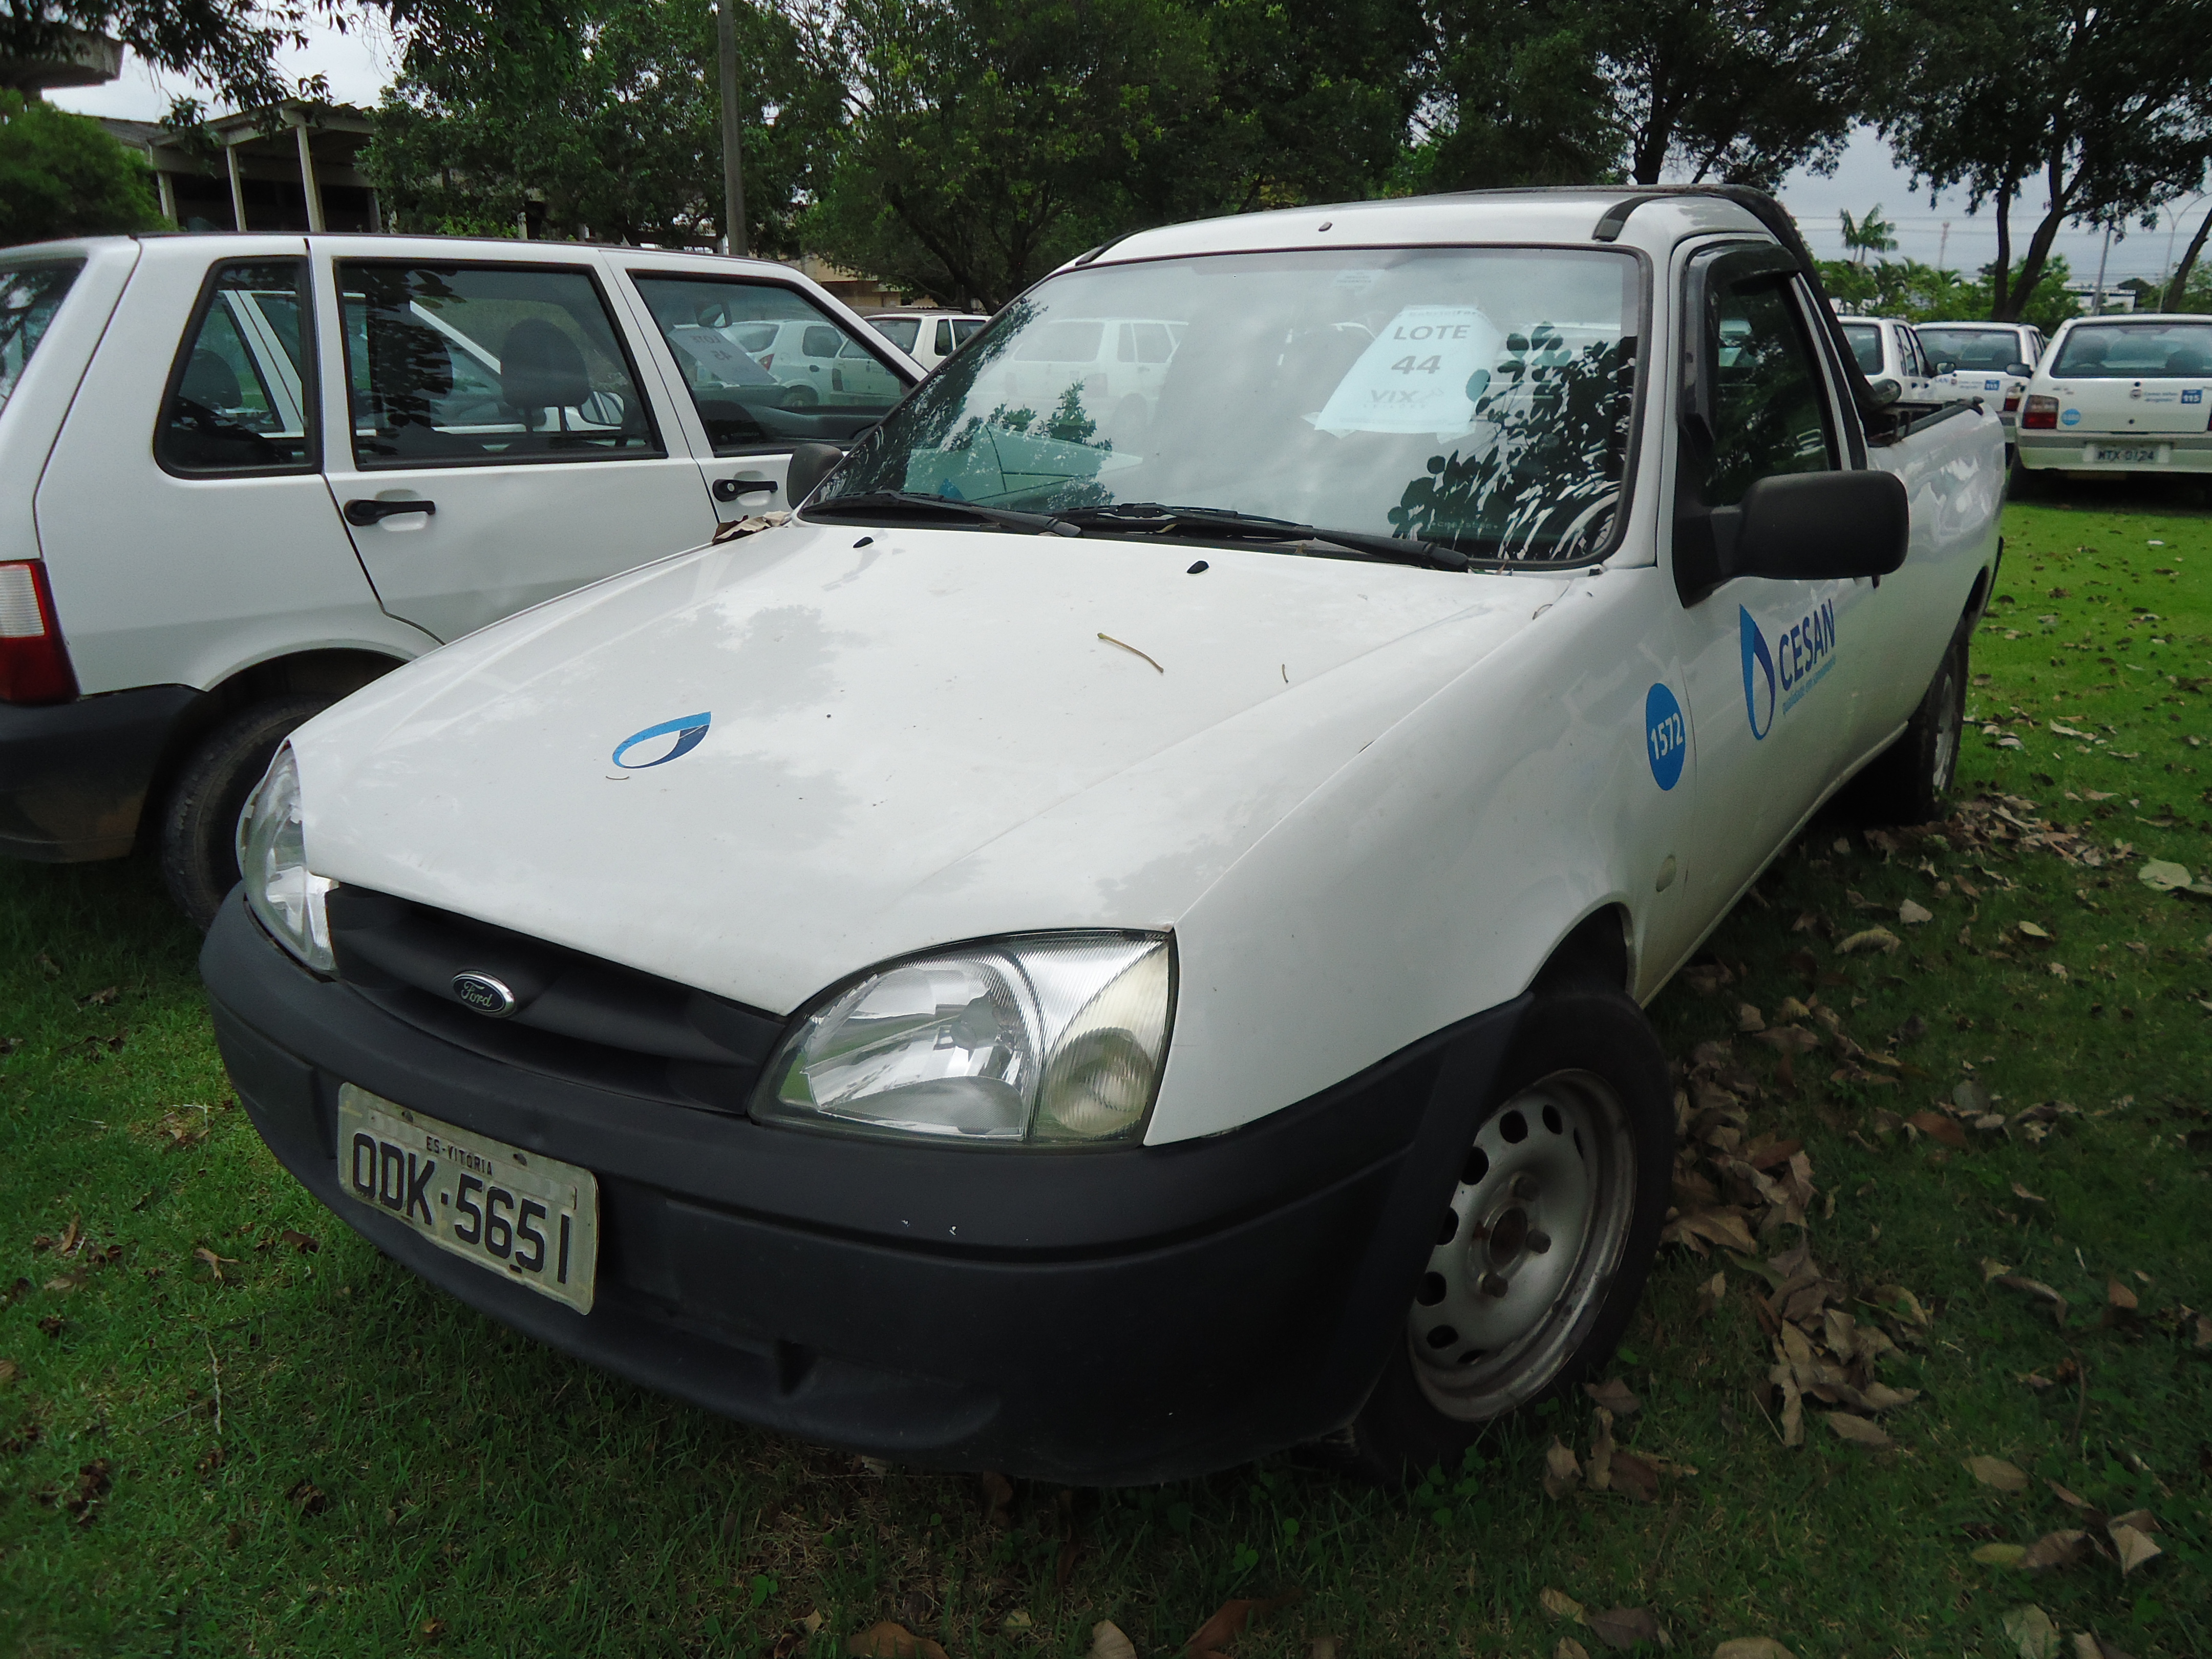 Ford Courier L 1.6 Flex, ANO 2012/2012